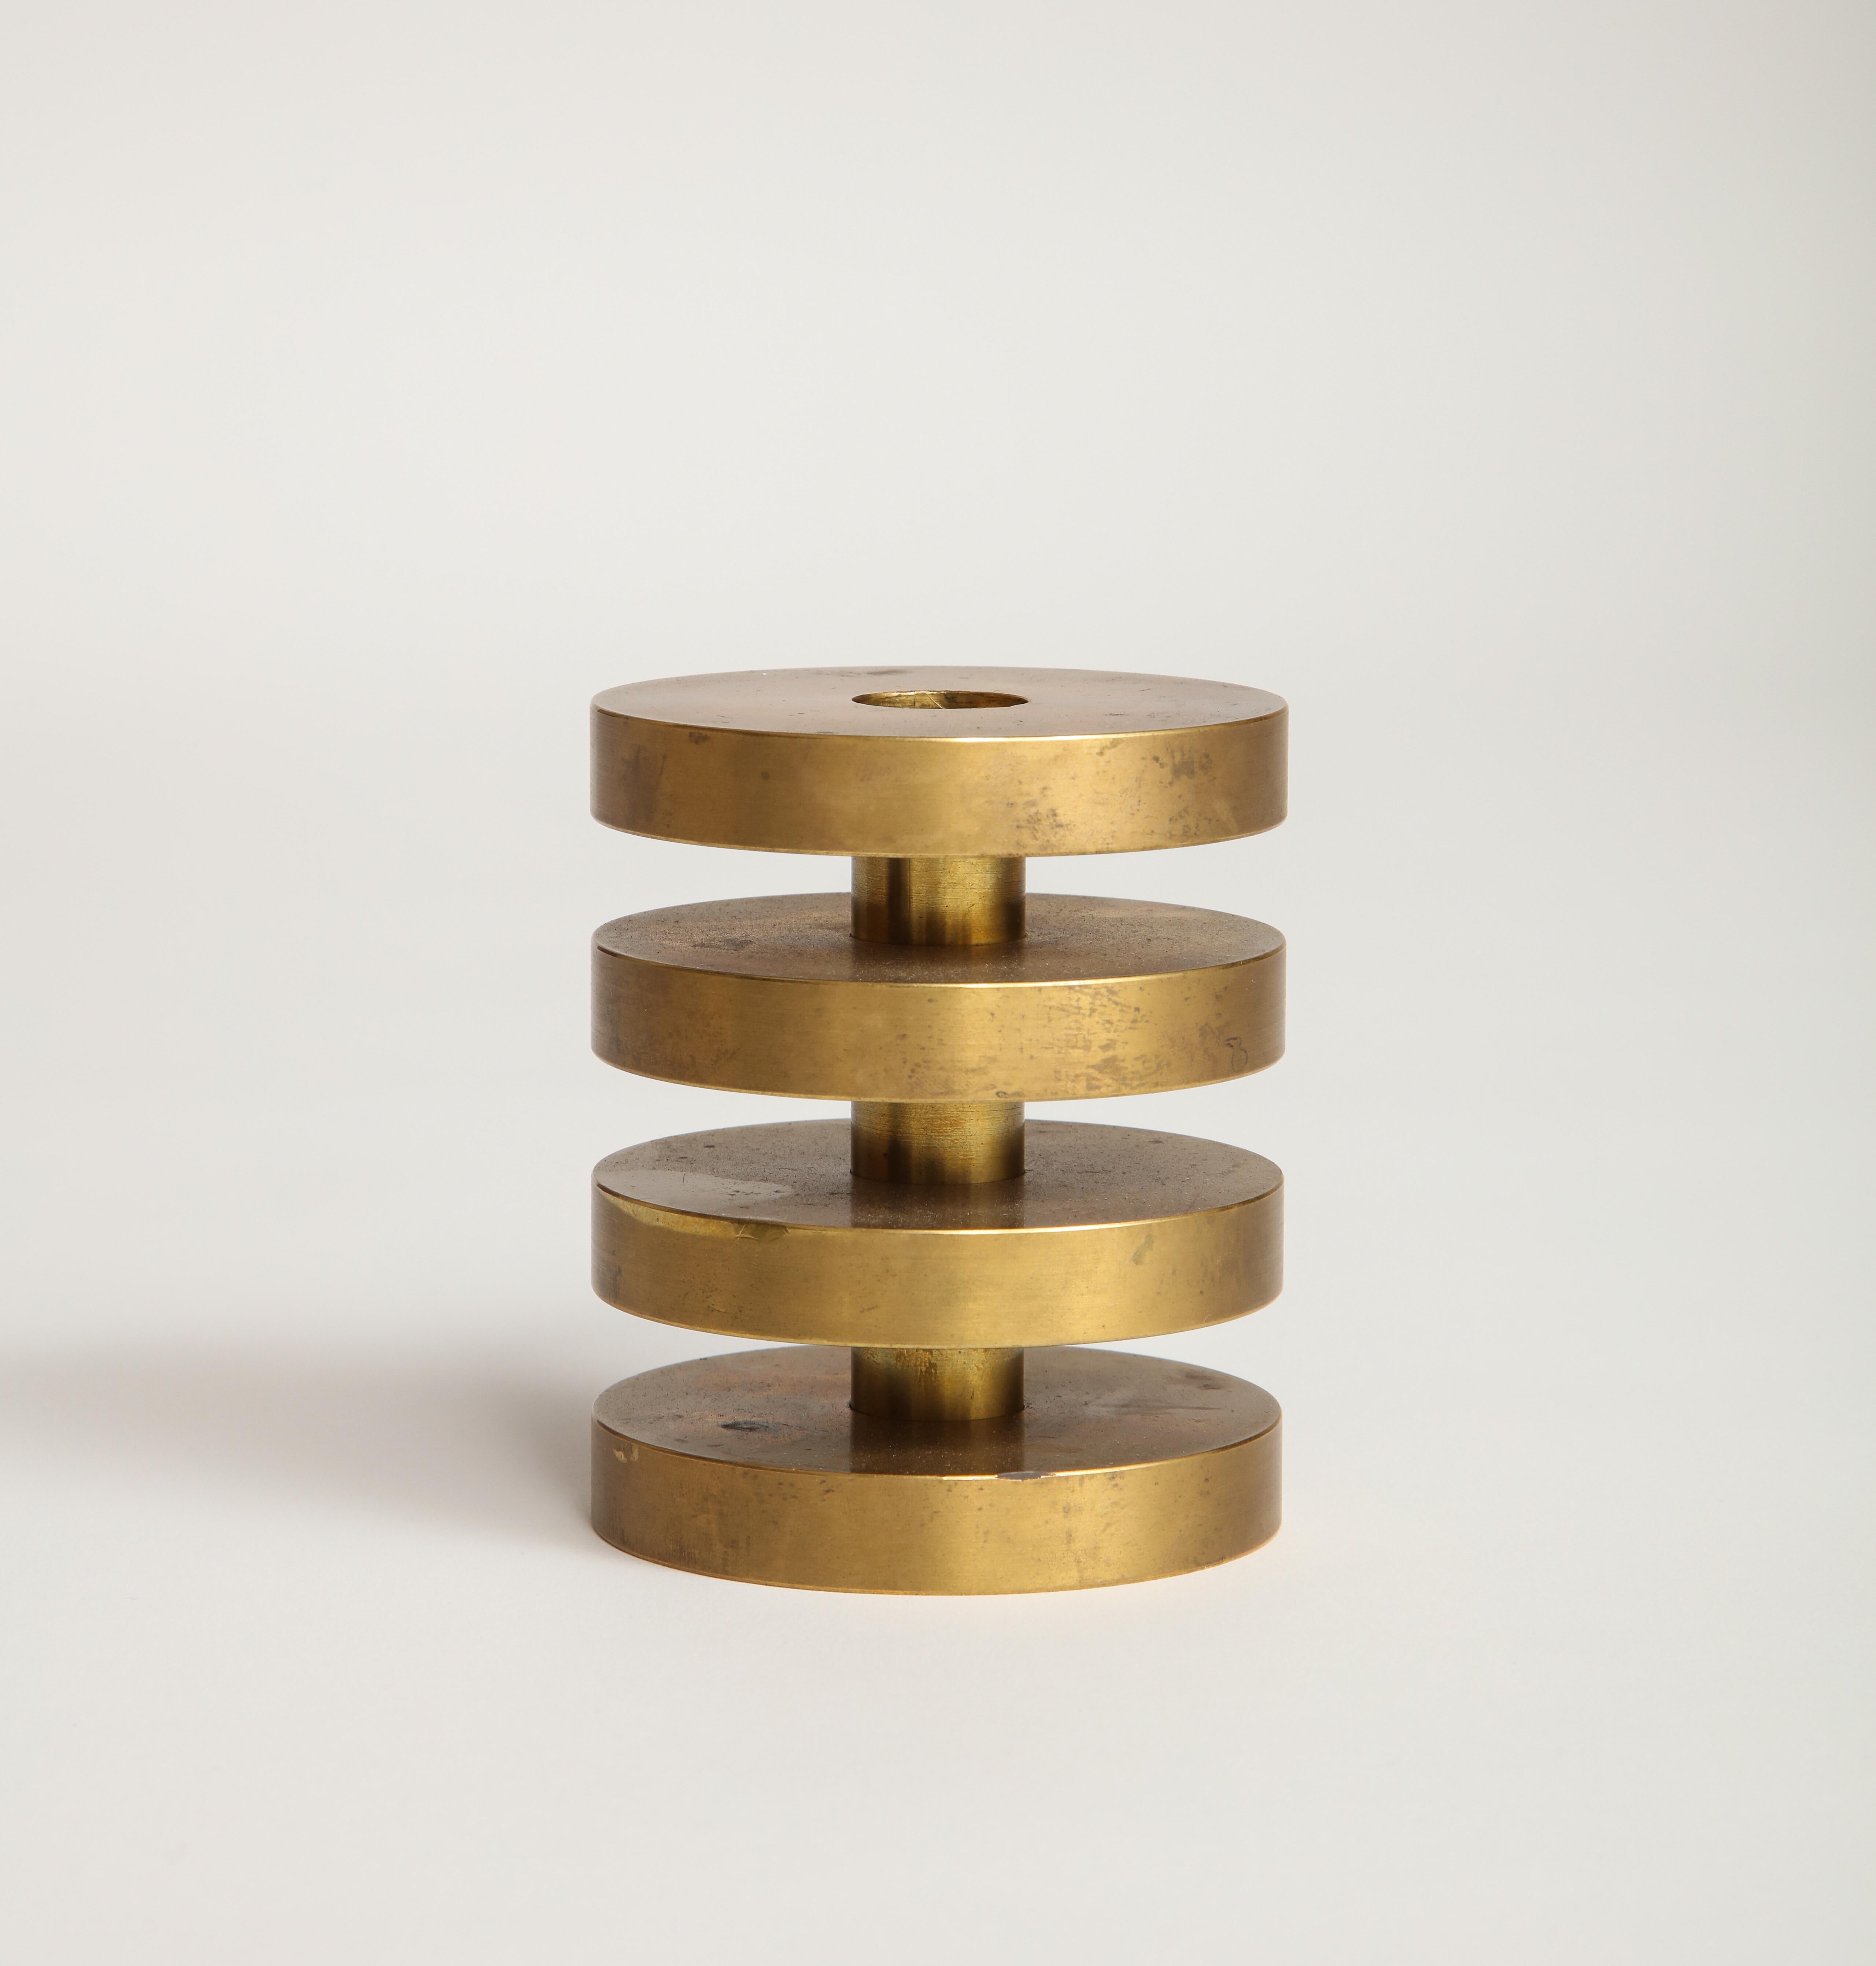 Modular turned brass object. Solid brass. Heavy. Unique.